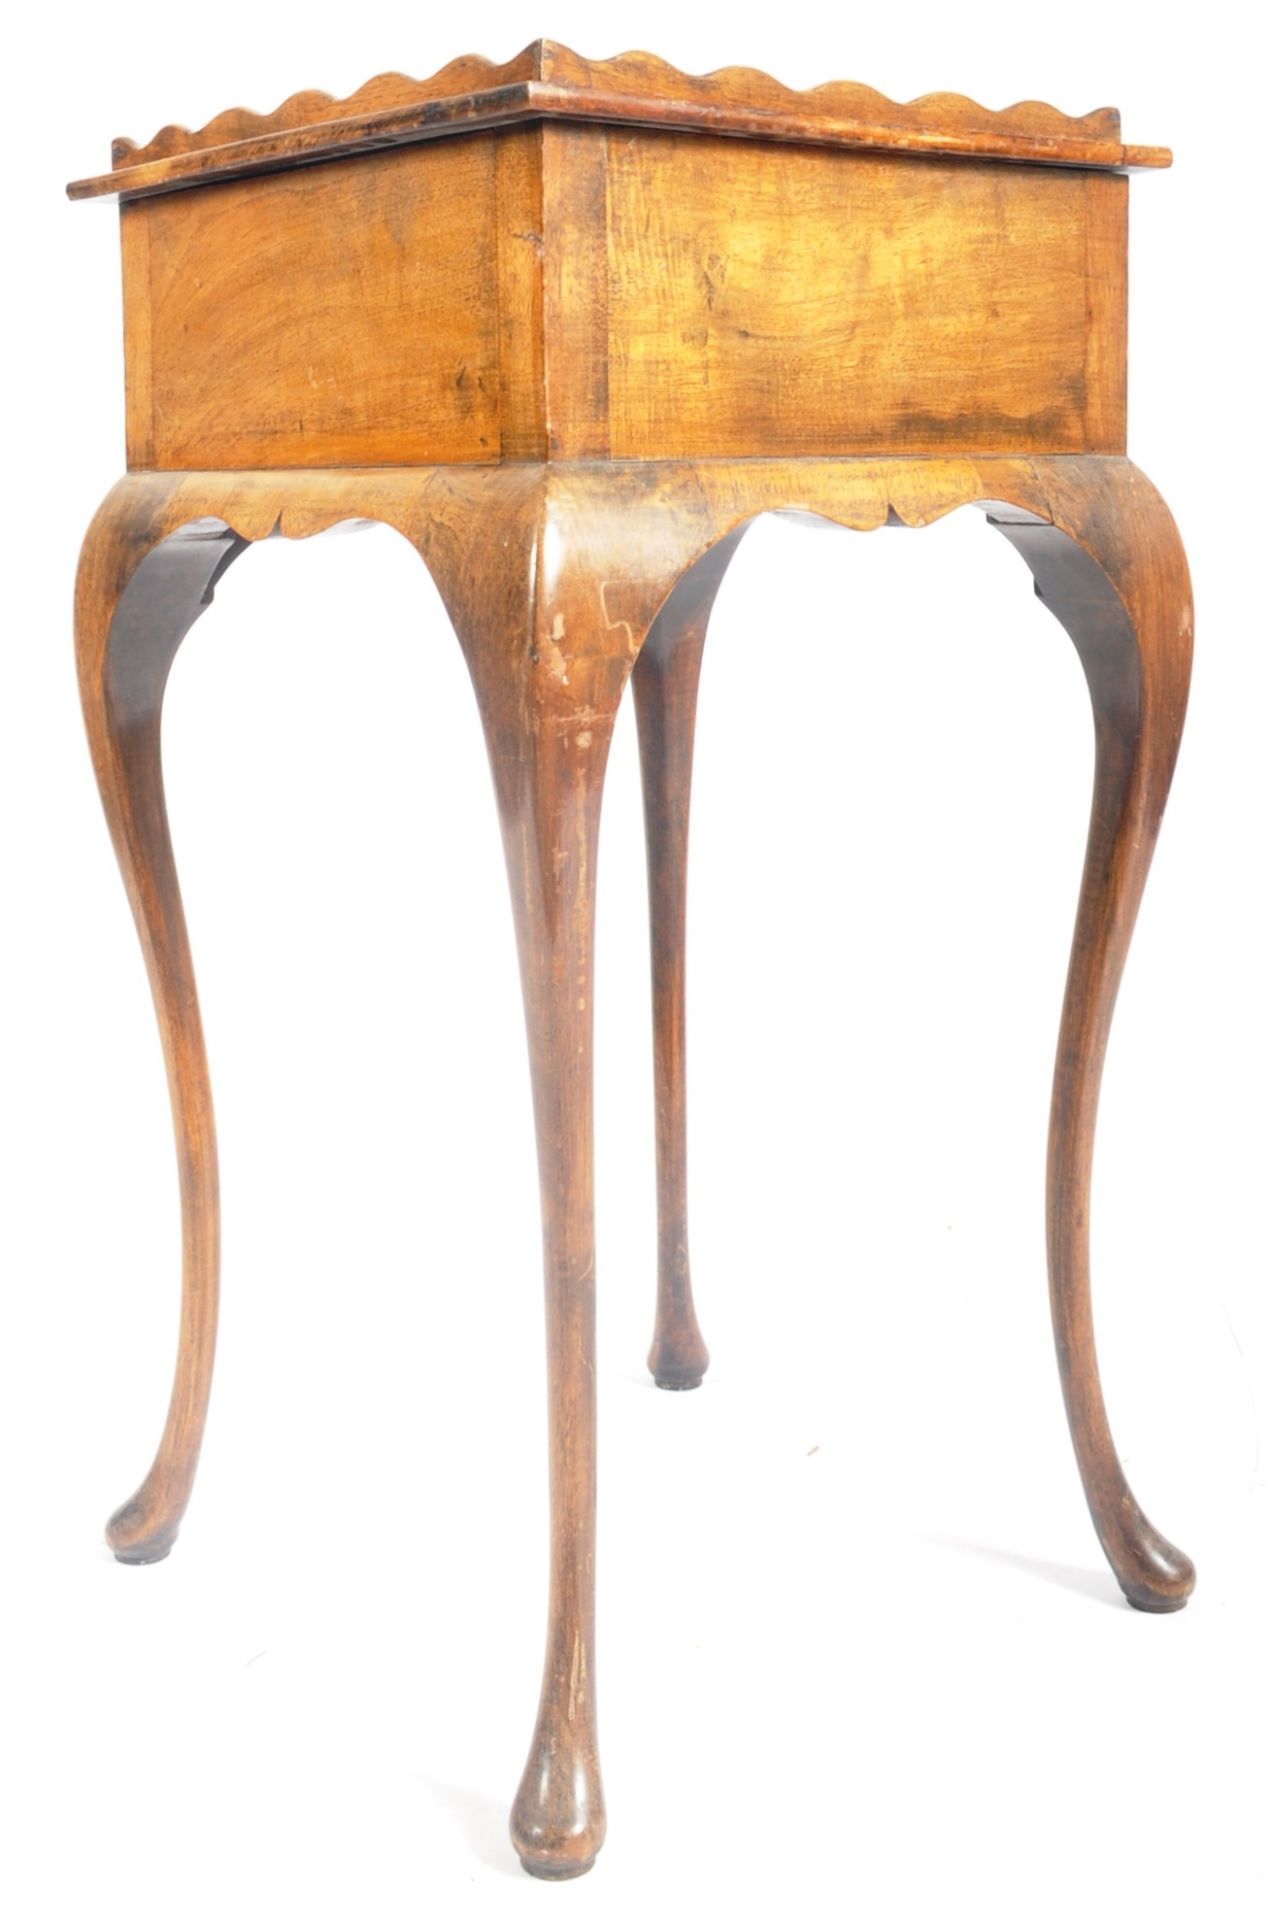 QUEEN ANNE REVIVAL CIRCA 1900 WALNUT BEDSIDE CABINET TABLE - Image 8 of 8